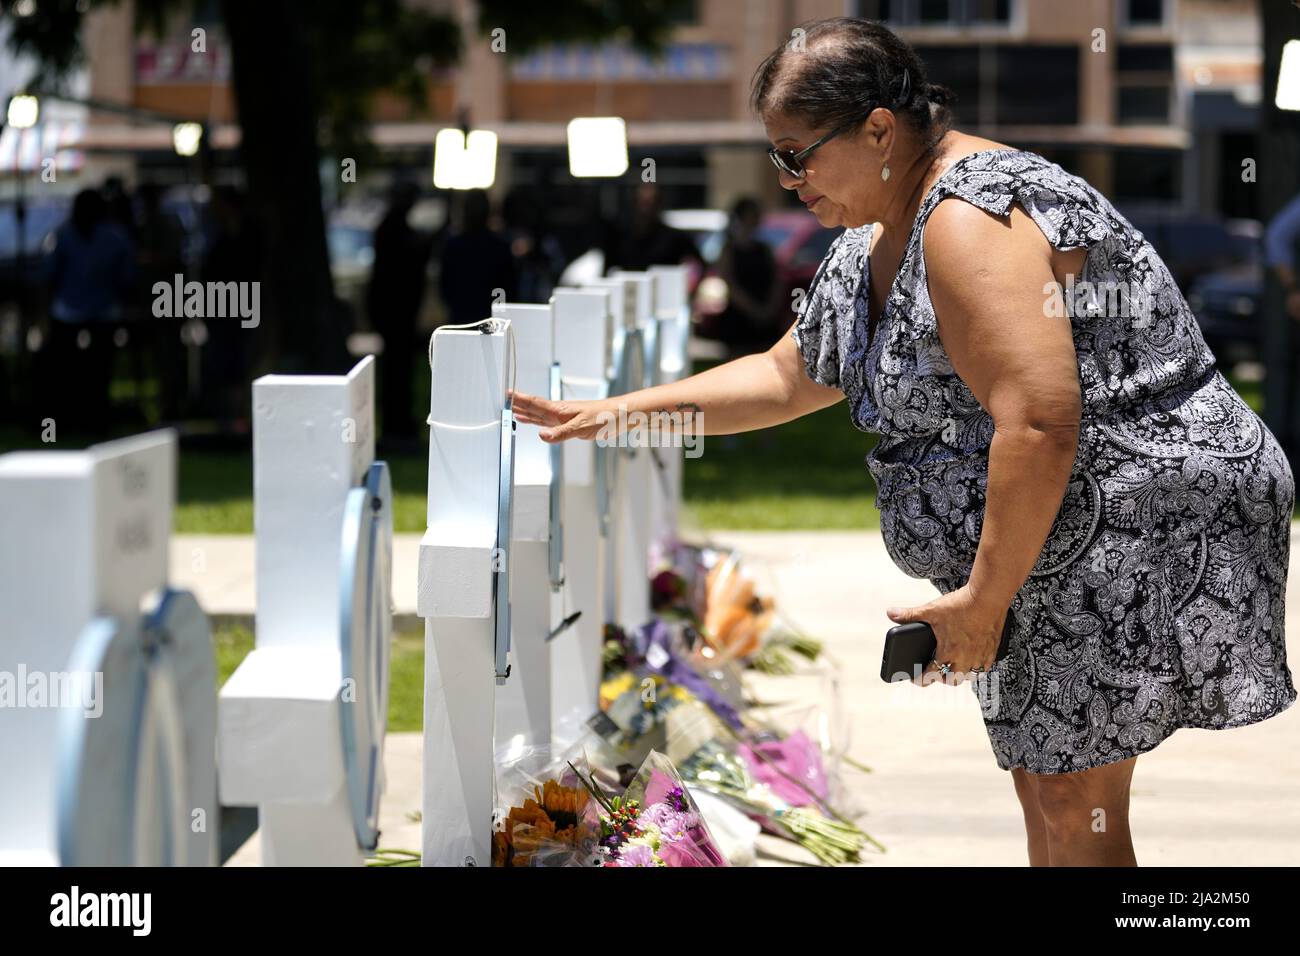 Uvalde, USA. 26th May, 2022. A woman mourns for victims of a school mass shooting in Uvalde, Texas, the United States, May 26, 2022. At least 19 children and two adults were killed in a shooting at Robb Elementary School in the town of Uvalde, Texas, on Tuesday. Credit: Wu Xiaoling/Xinhua/Alamy Live News Stock Photo